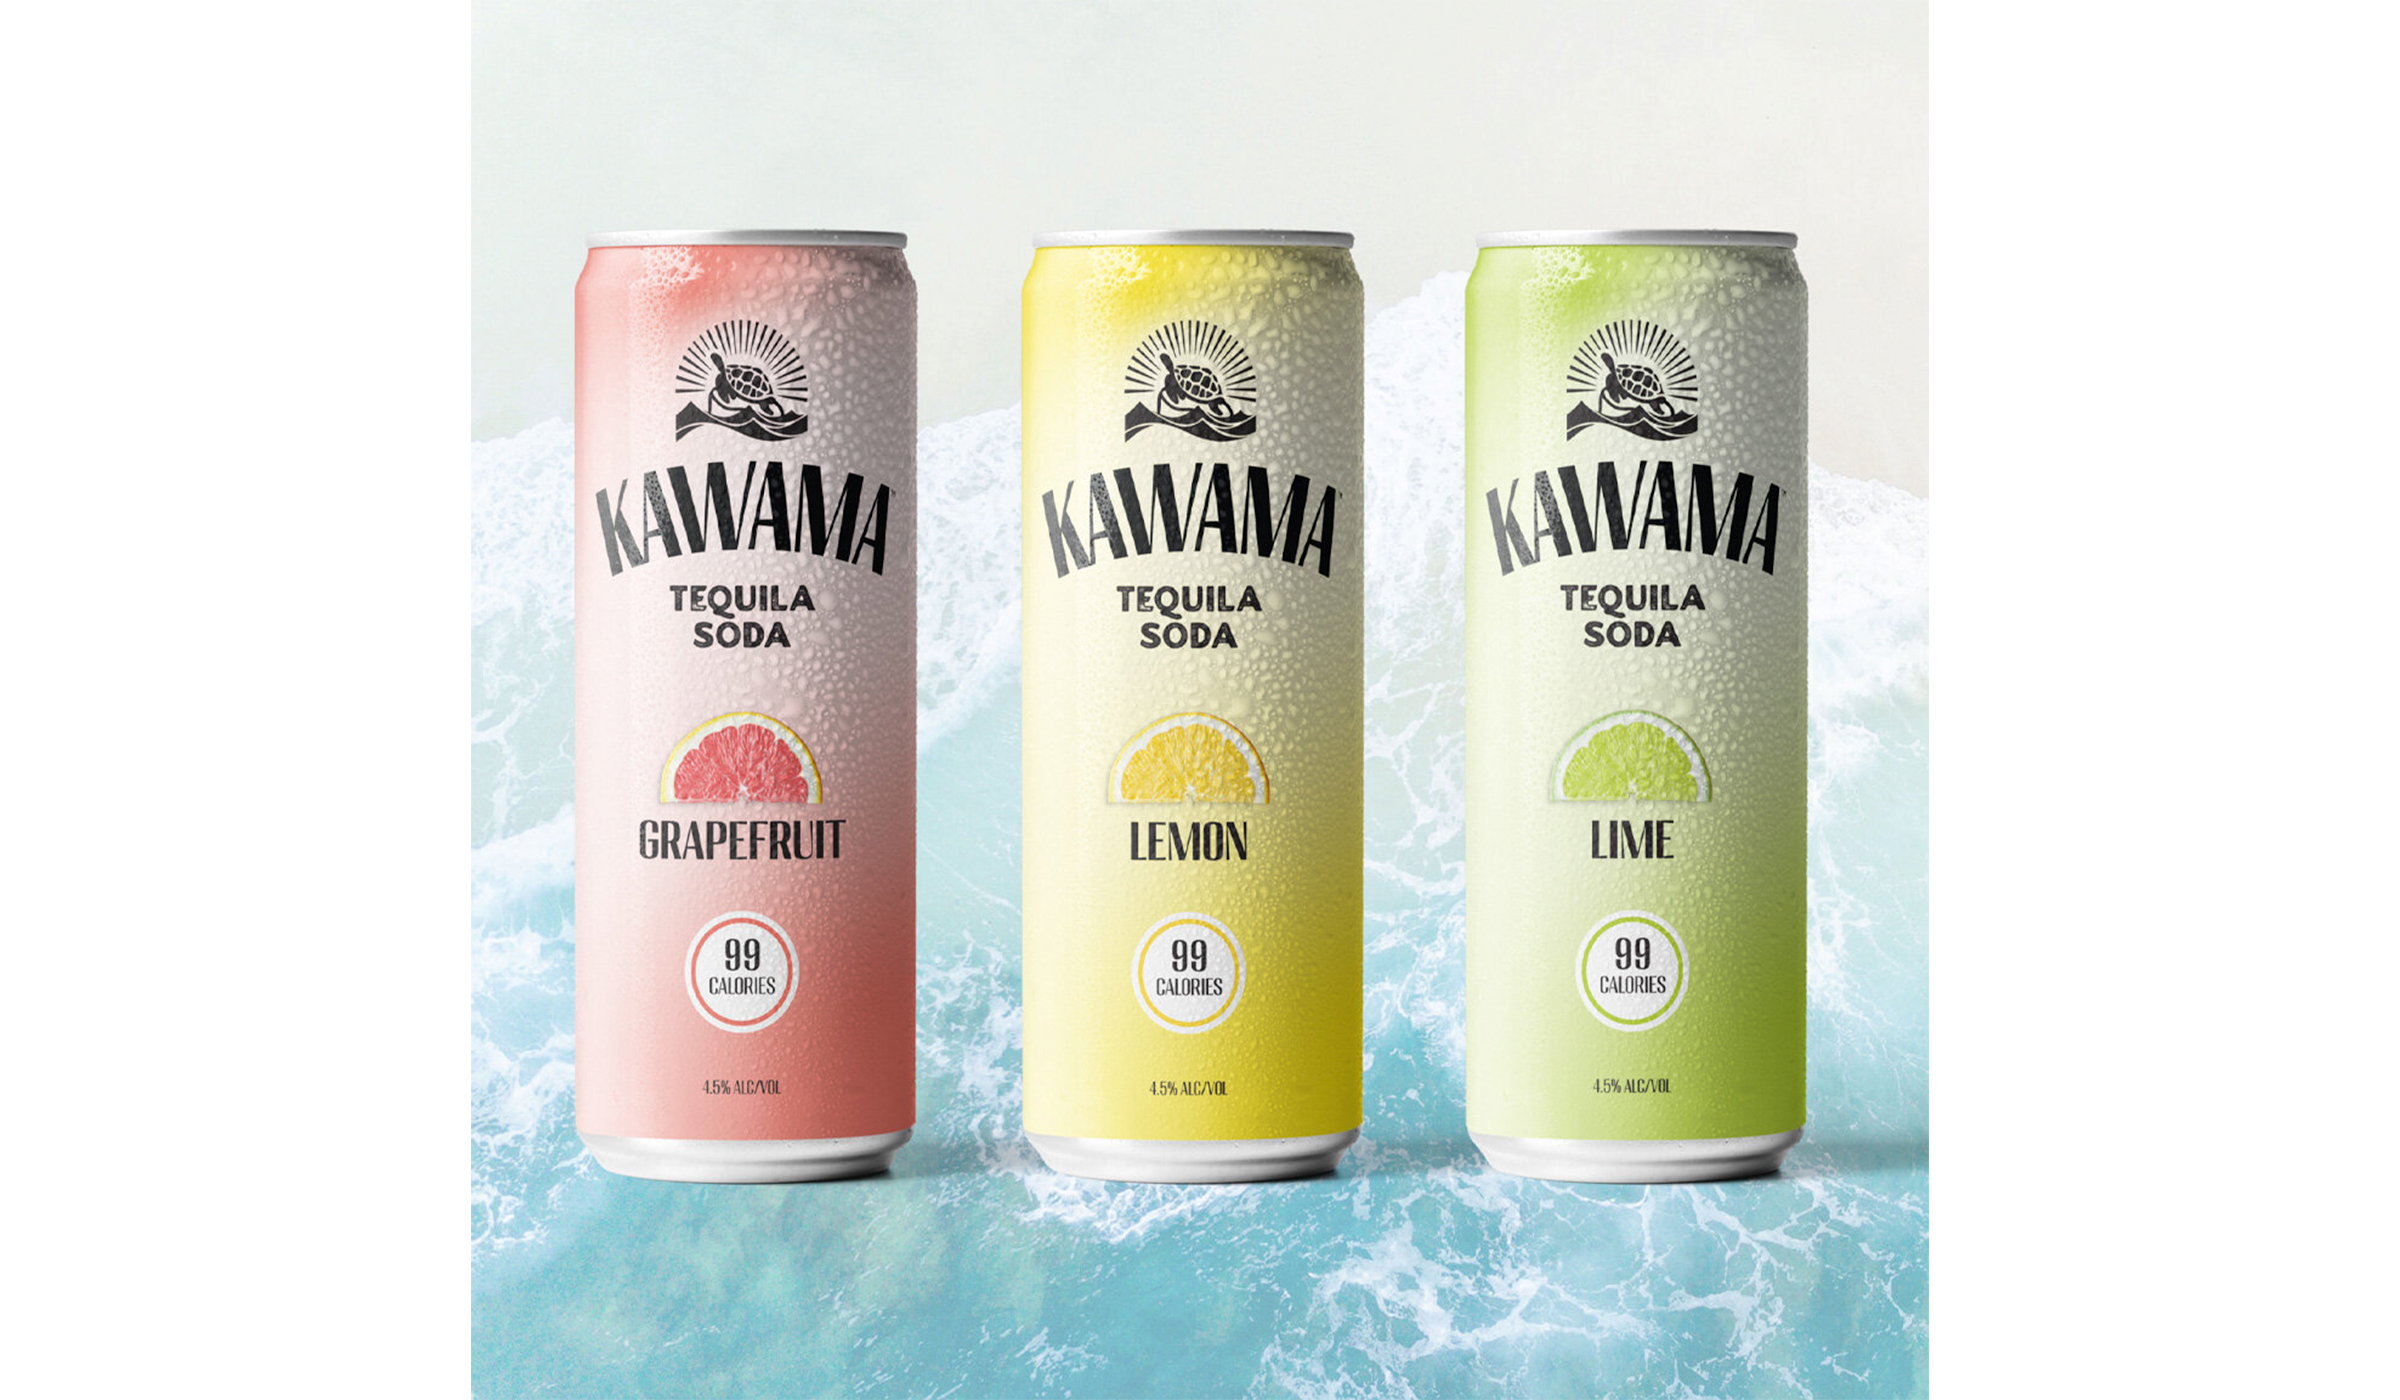 KAWAMA Tequila & Soda, New PMC Sponsor, Will Be Available PMC Weekend